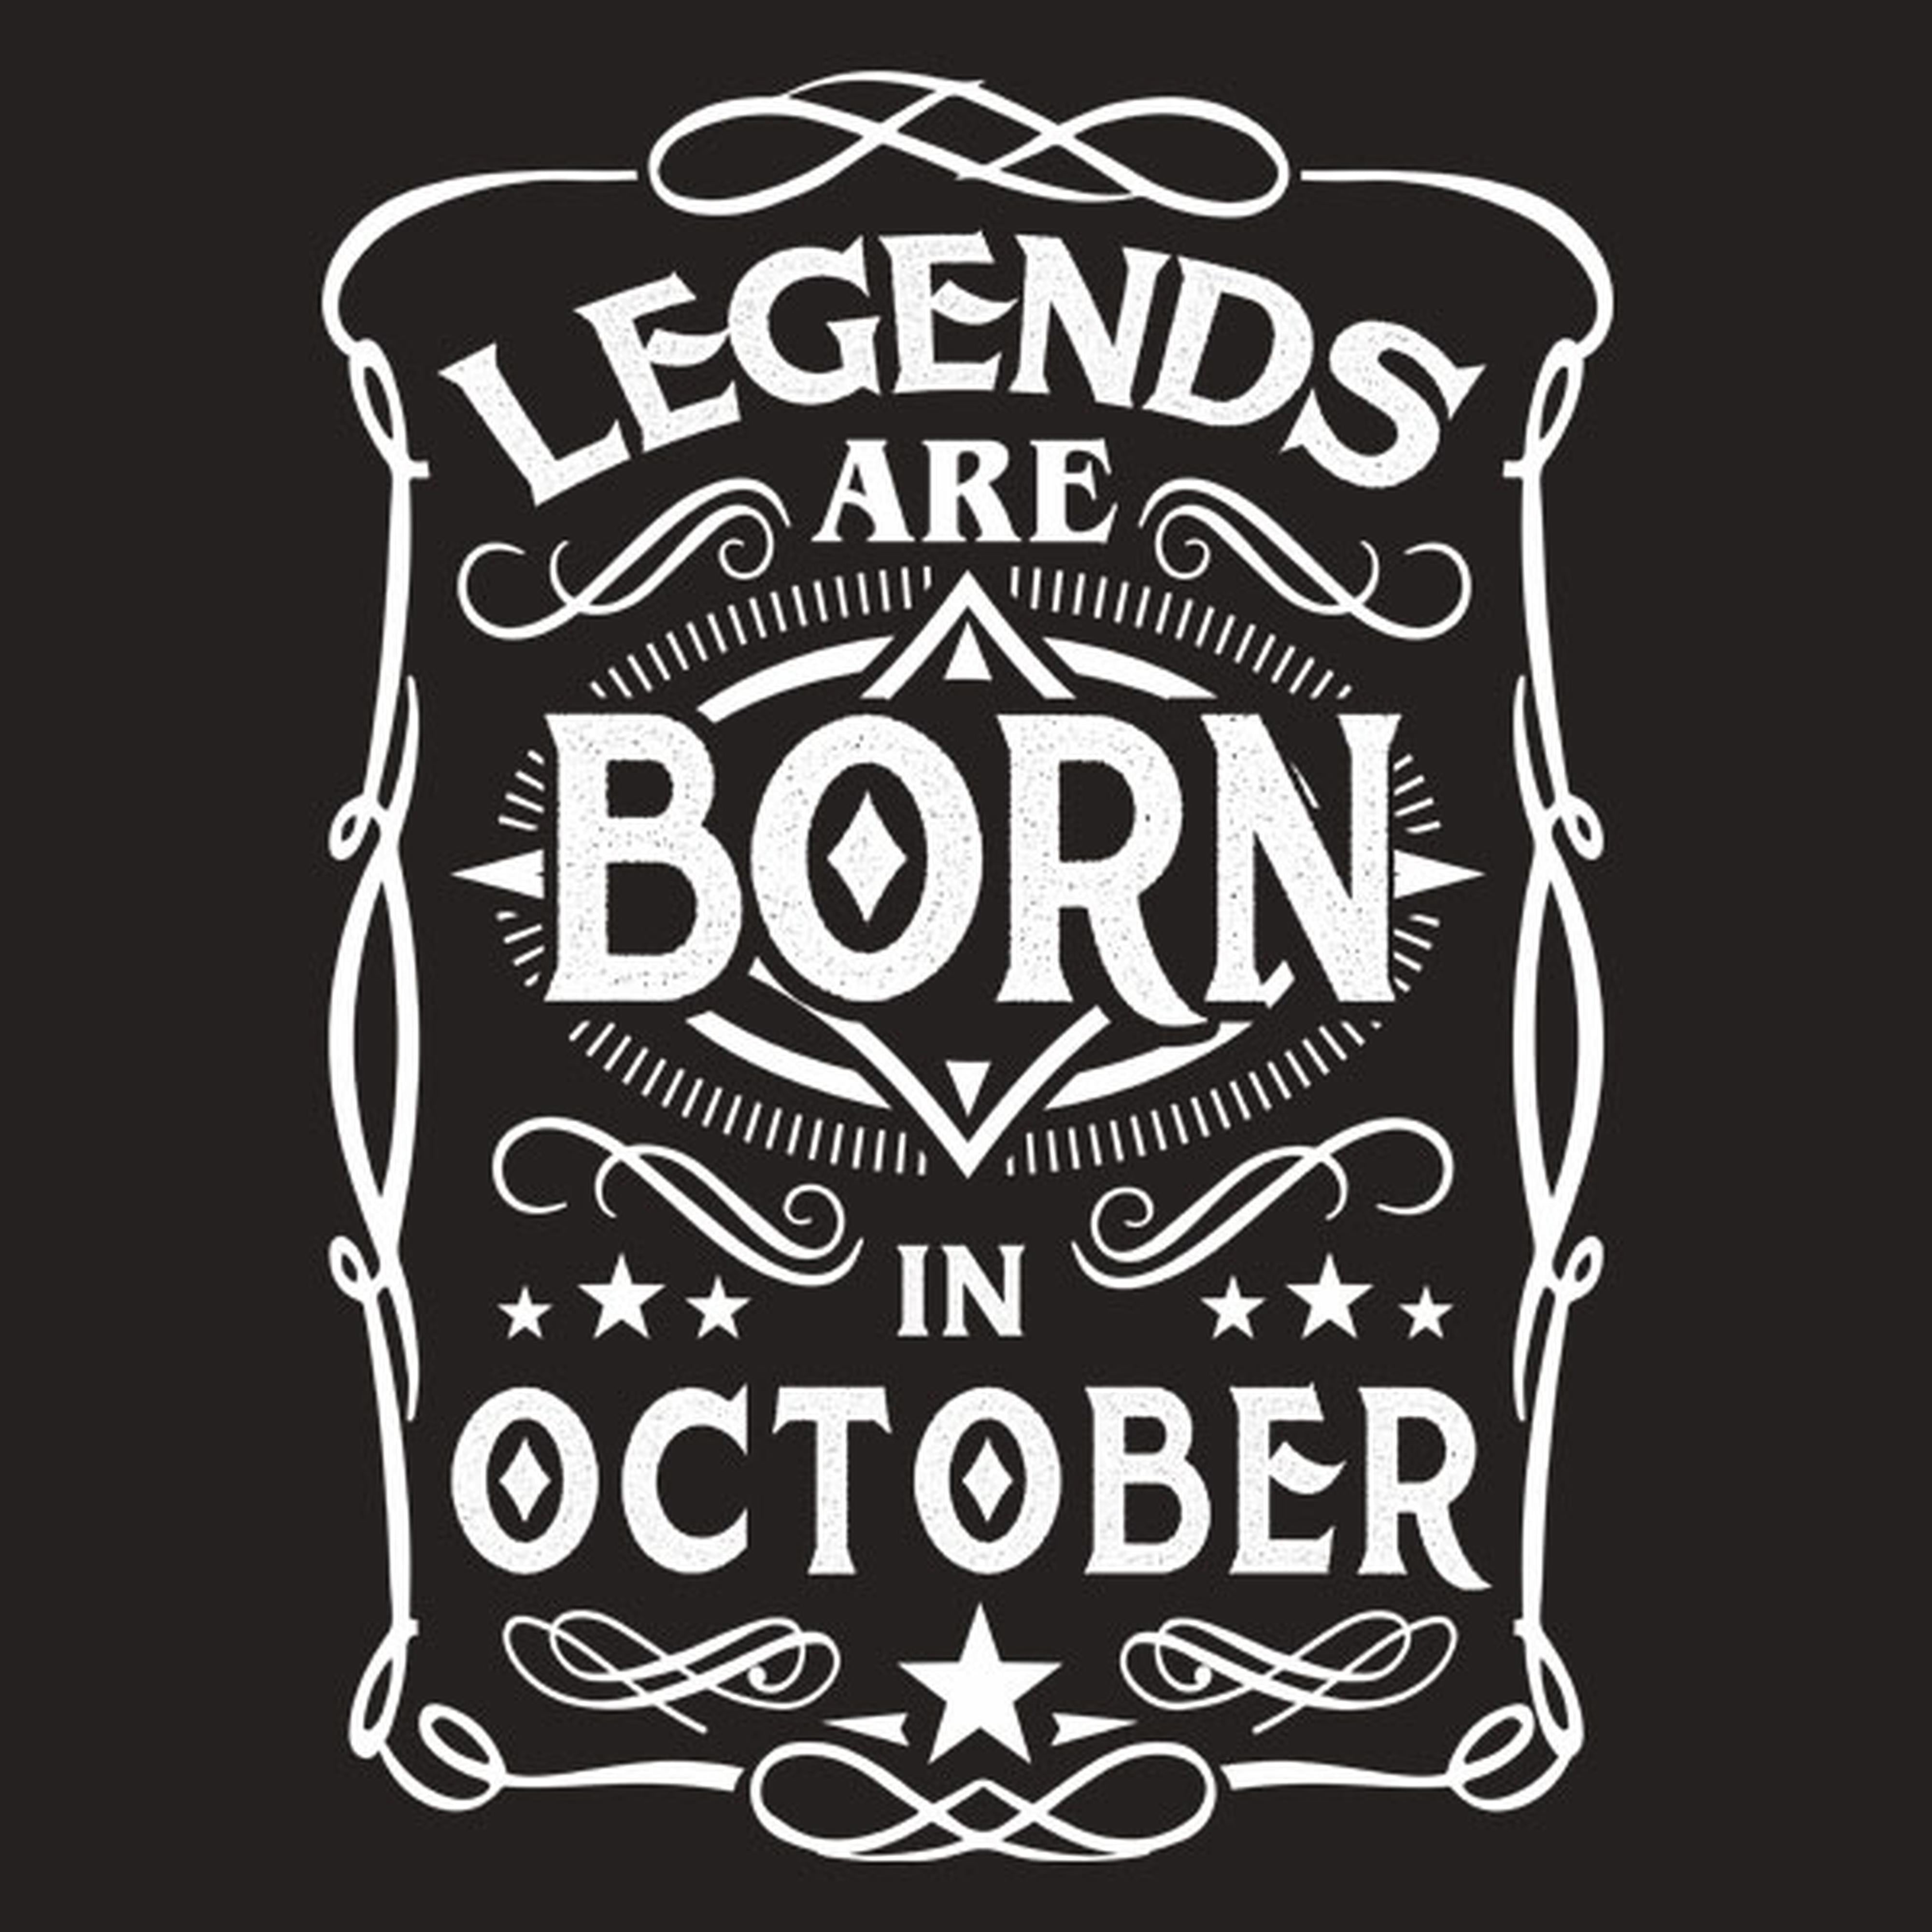 Legends are born in October - T-shirt